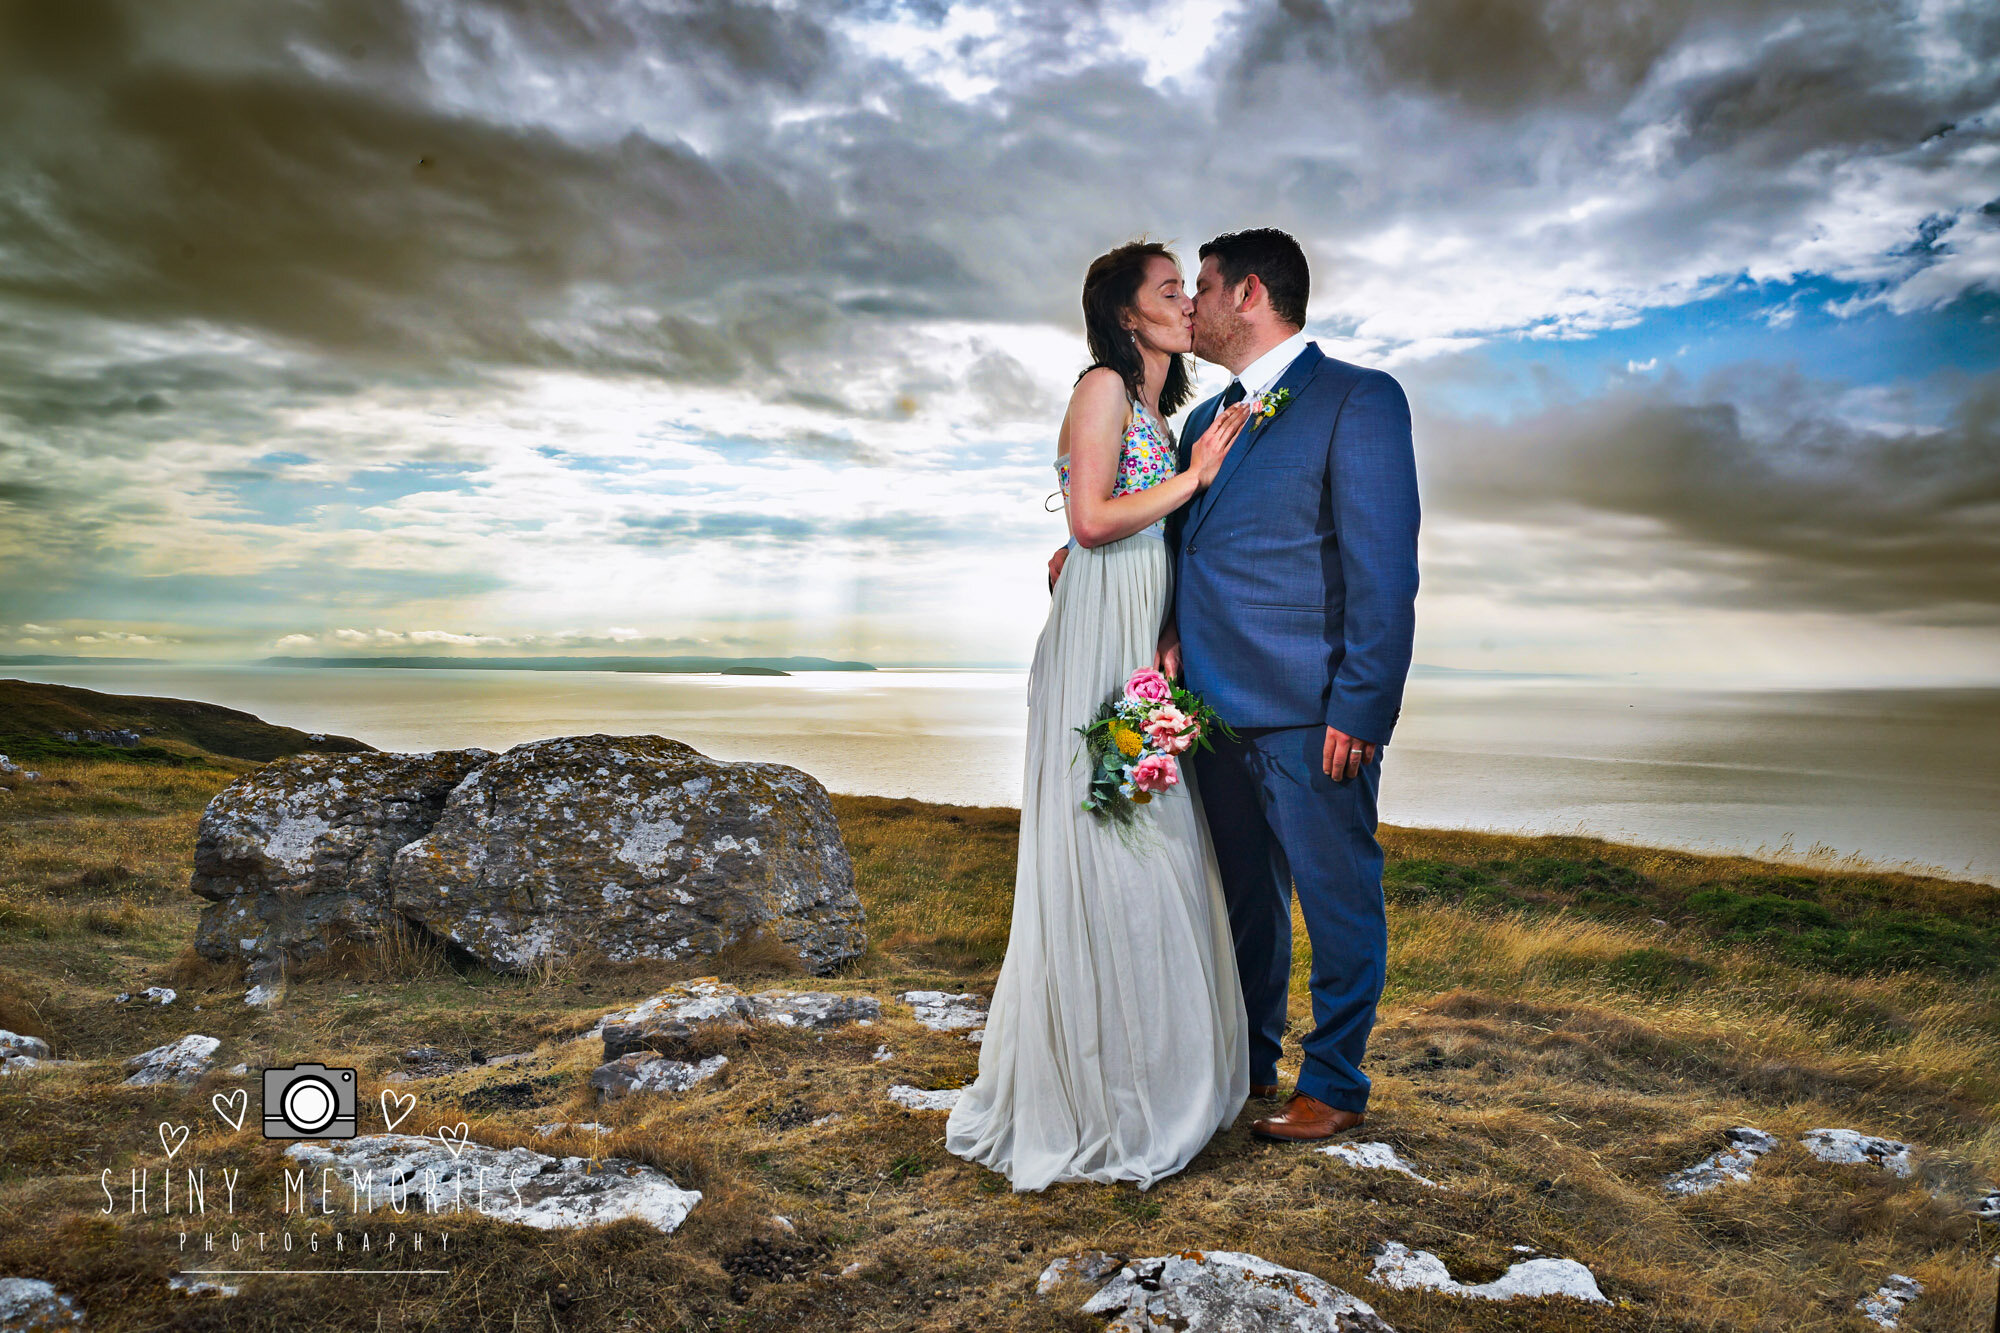 Shiny Memories North Wales Wedding Photographers - The Beaches - Pentre Mawr Country House-8.jpg